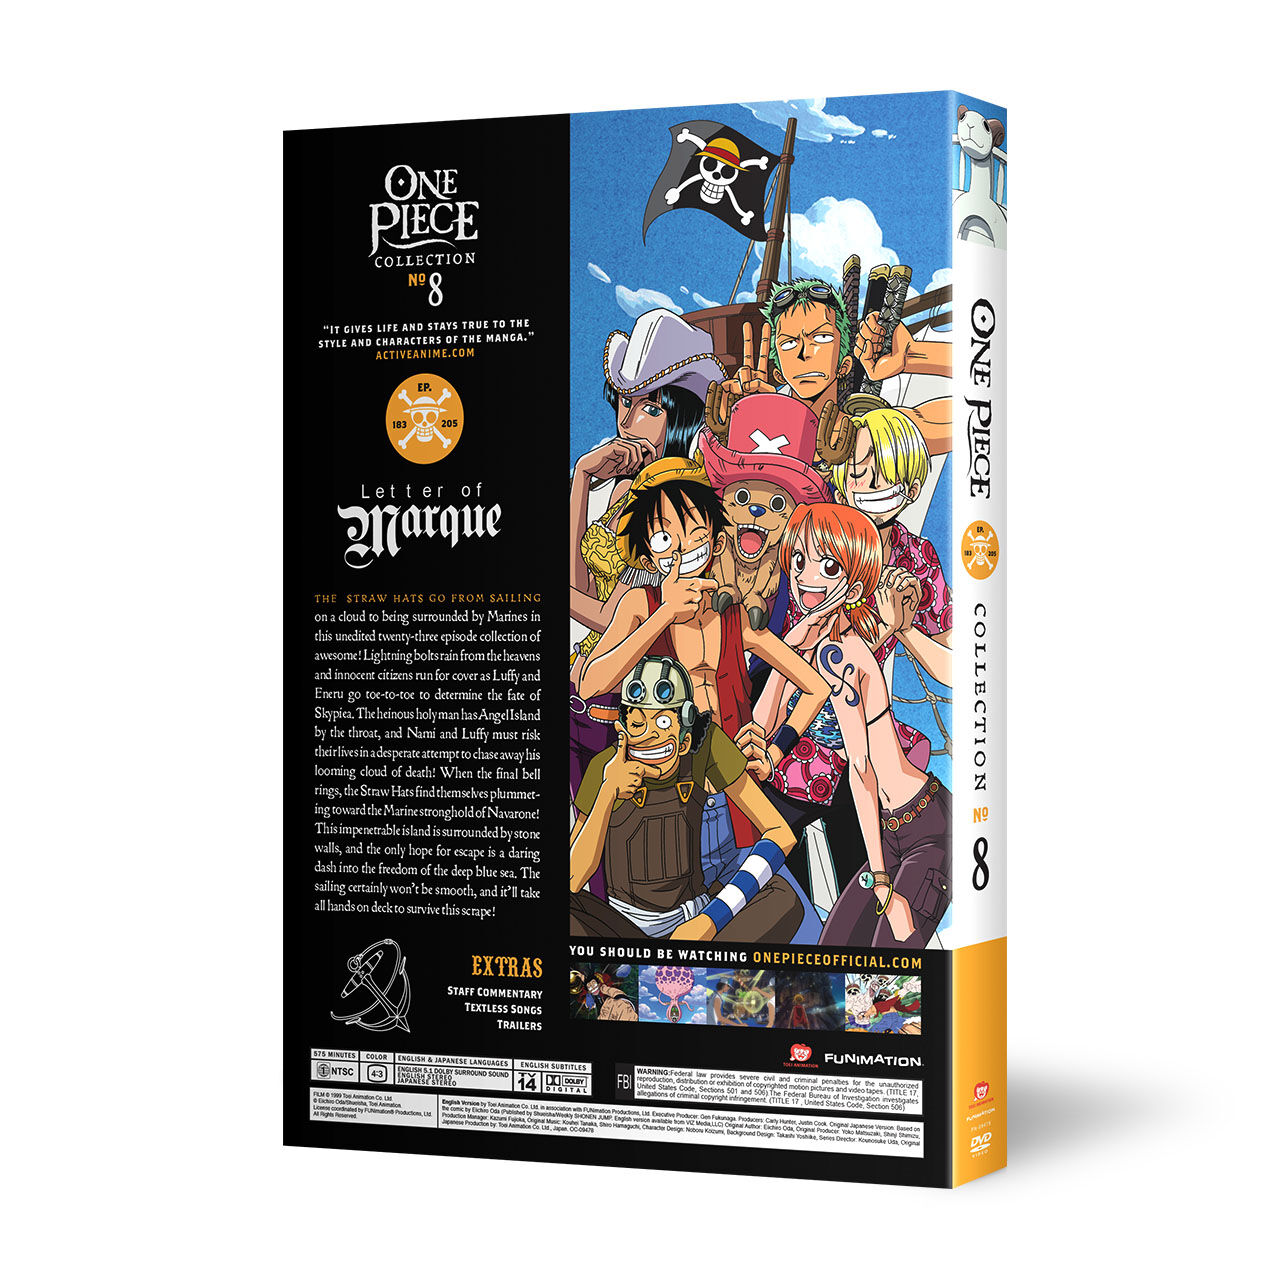 One Piece - Collection 8 - DVD | Crunchyroll Store